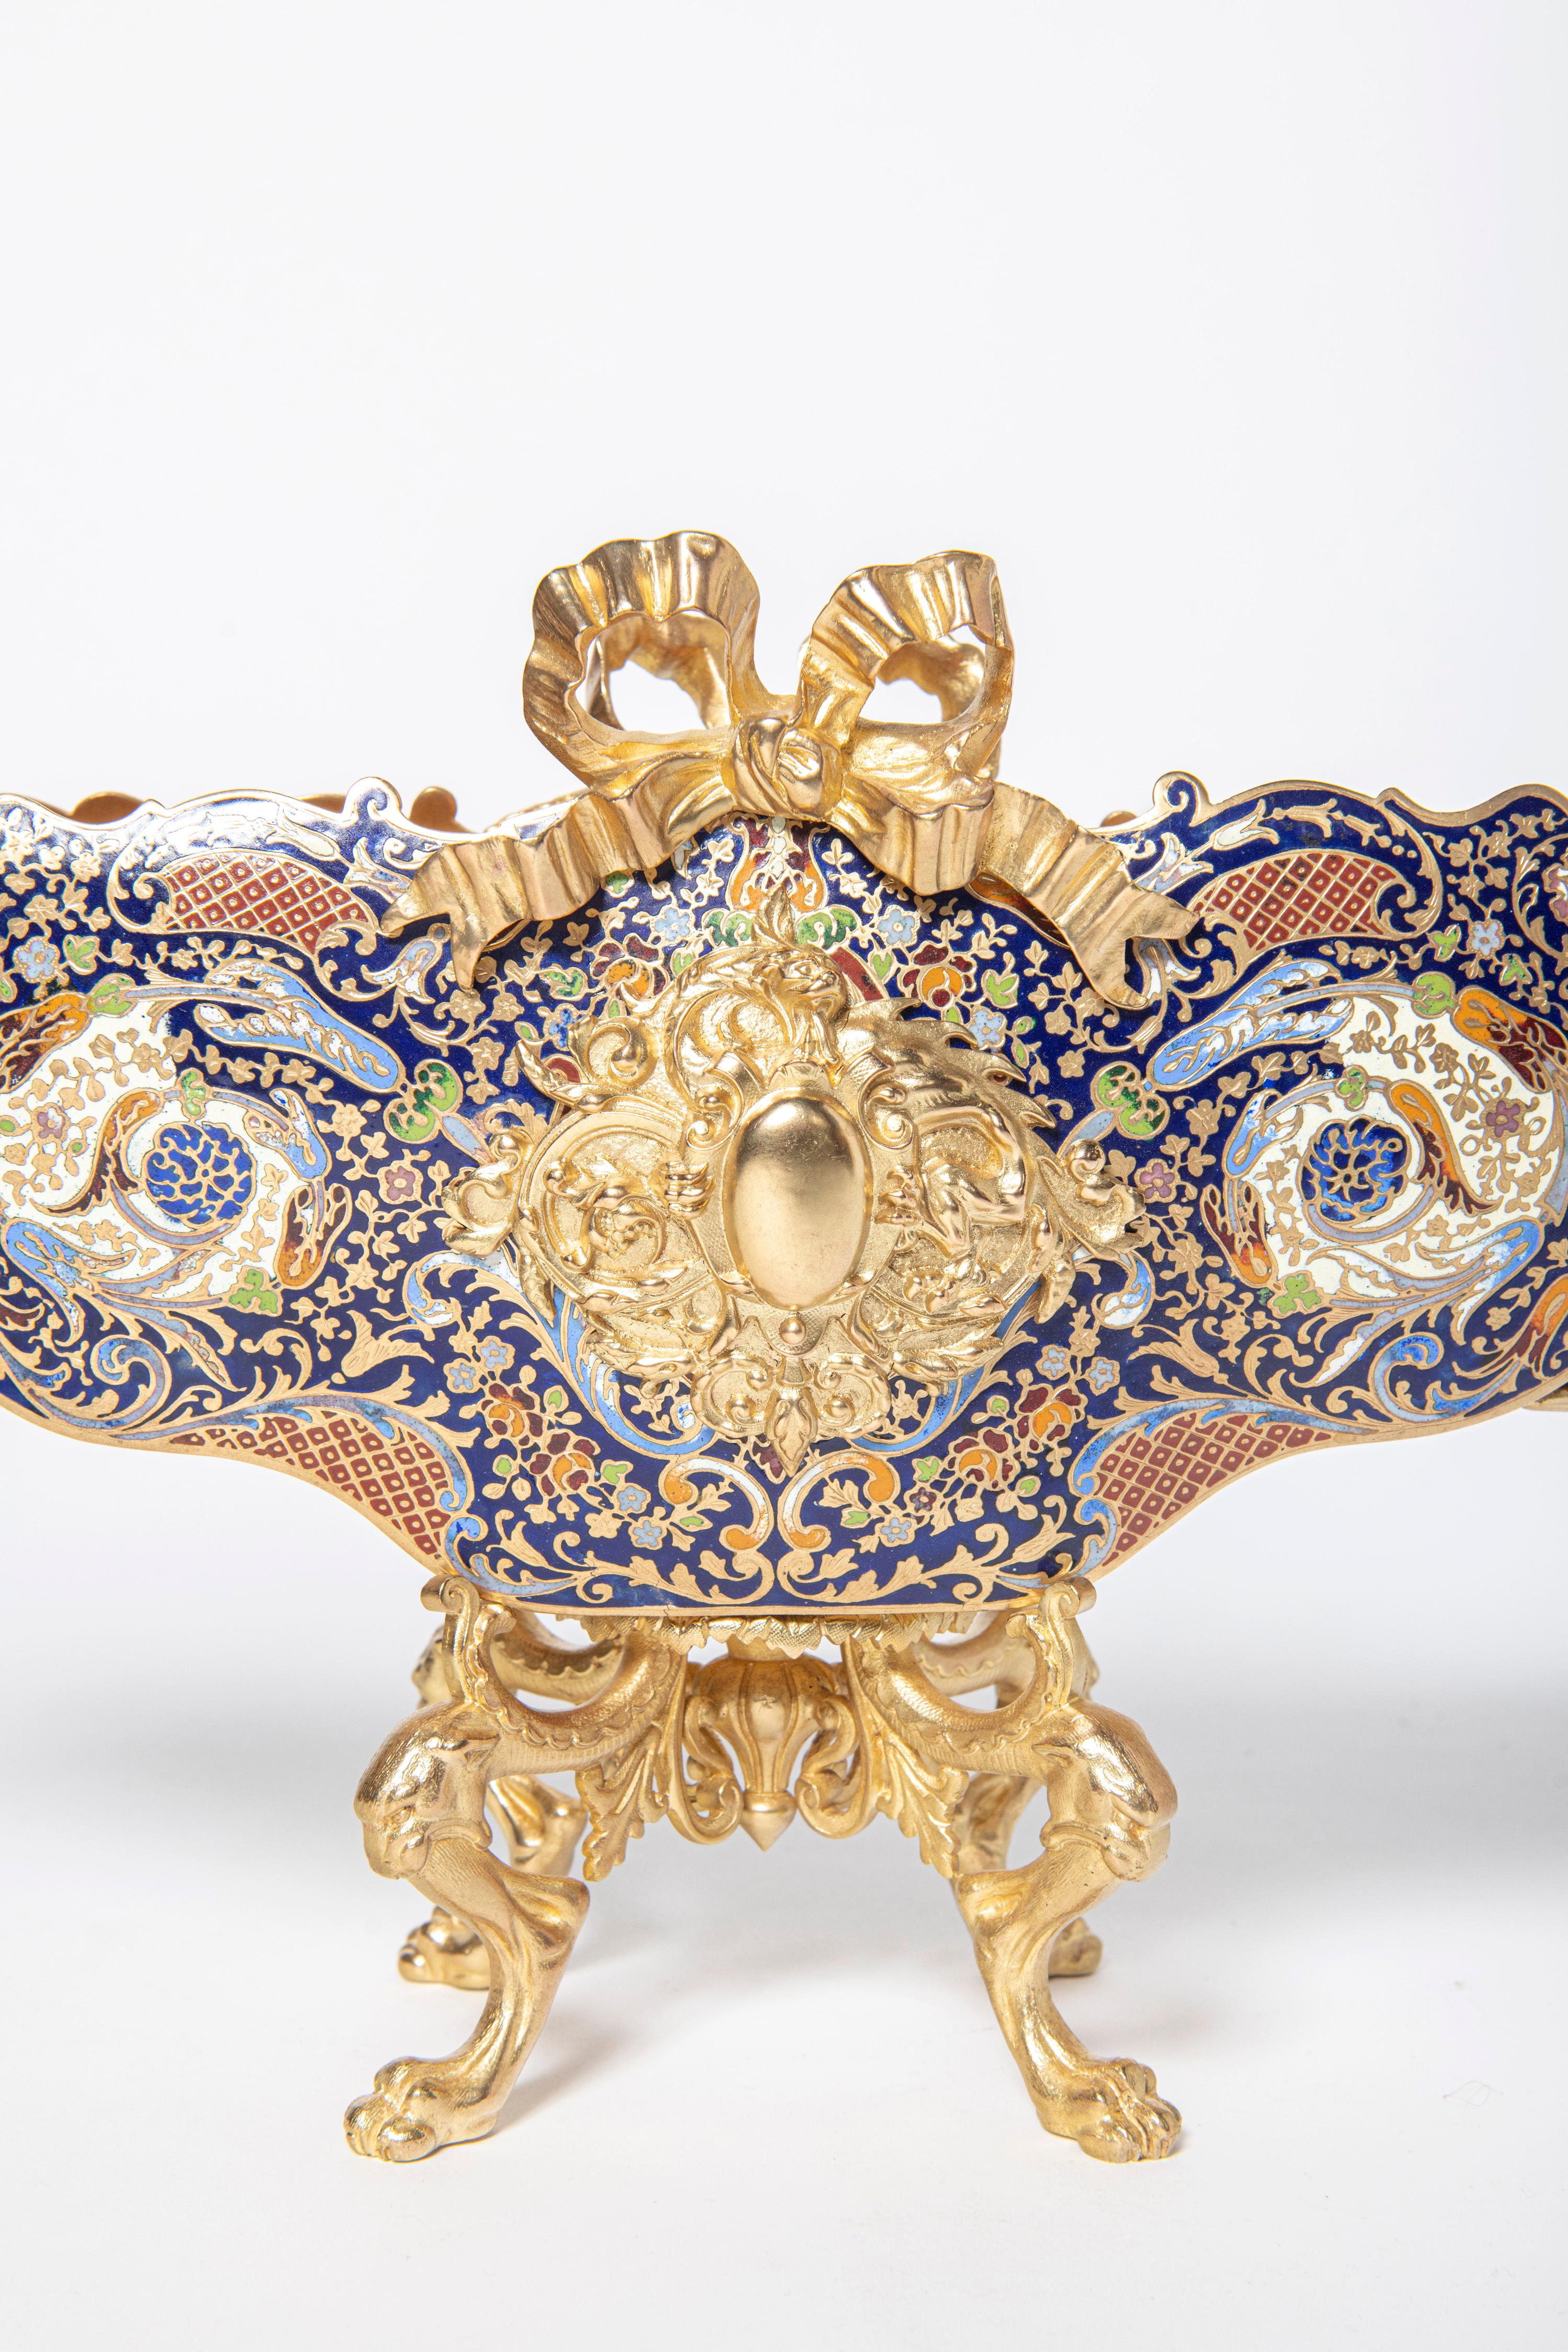 French Enamel and gilt bronze jardiniere. France, late 19th century. For Sale